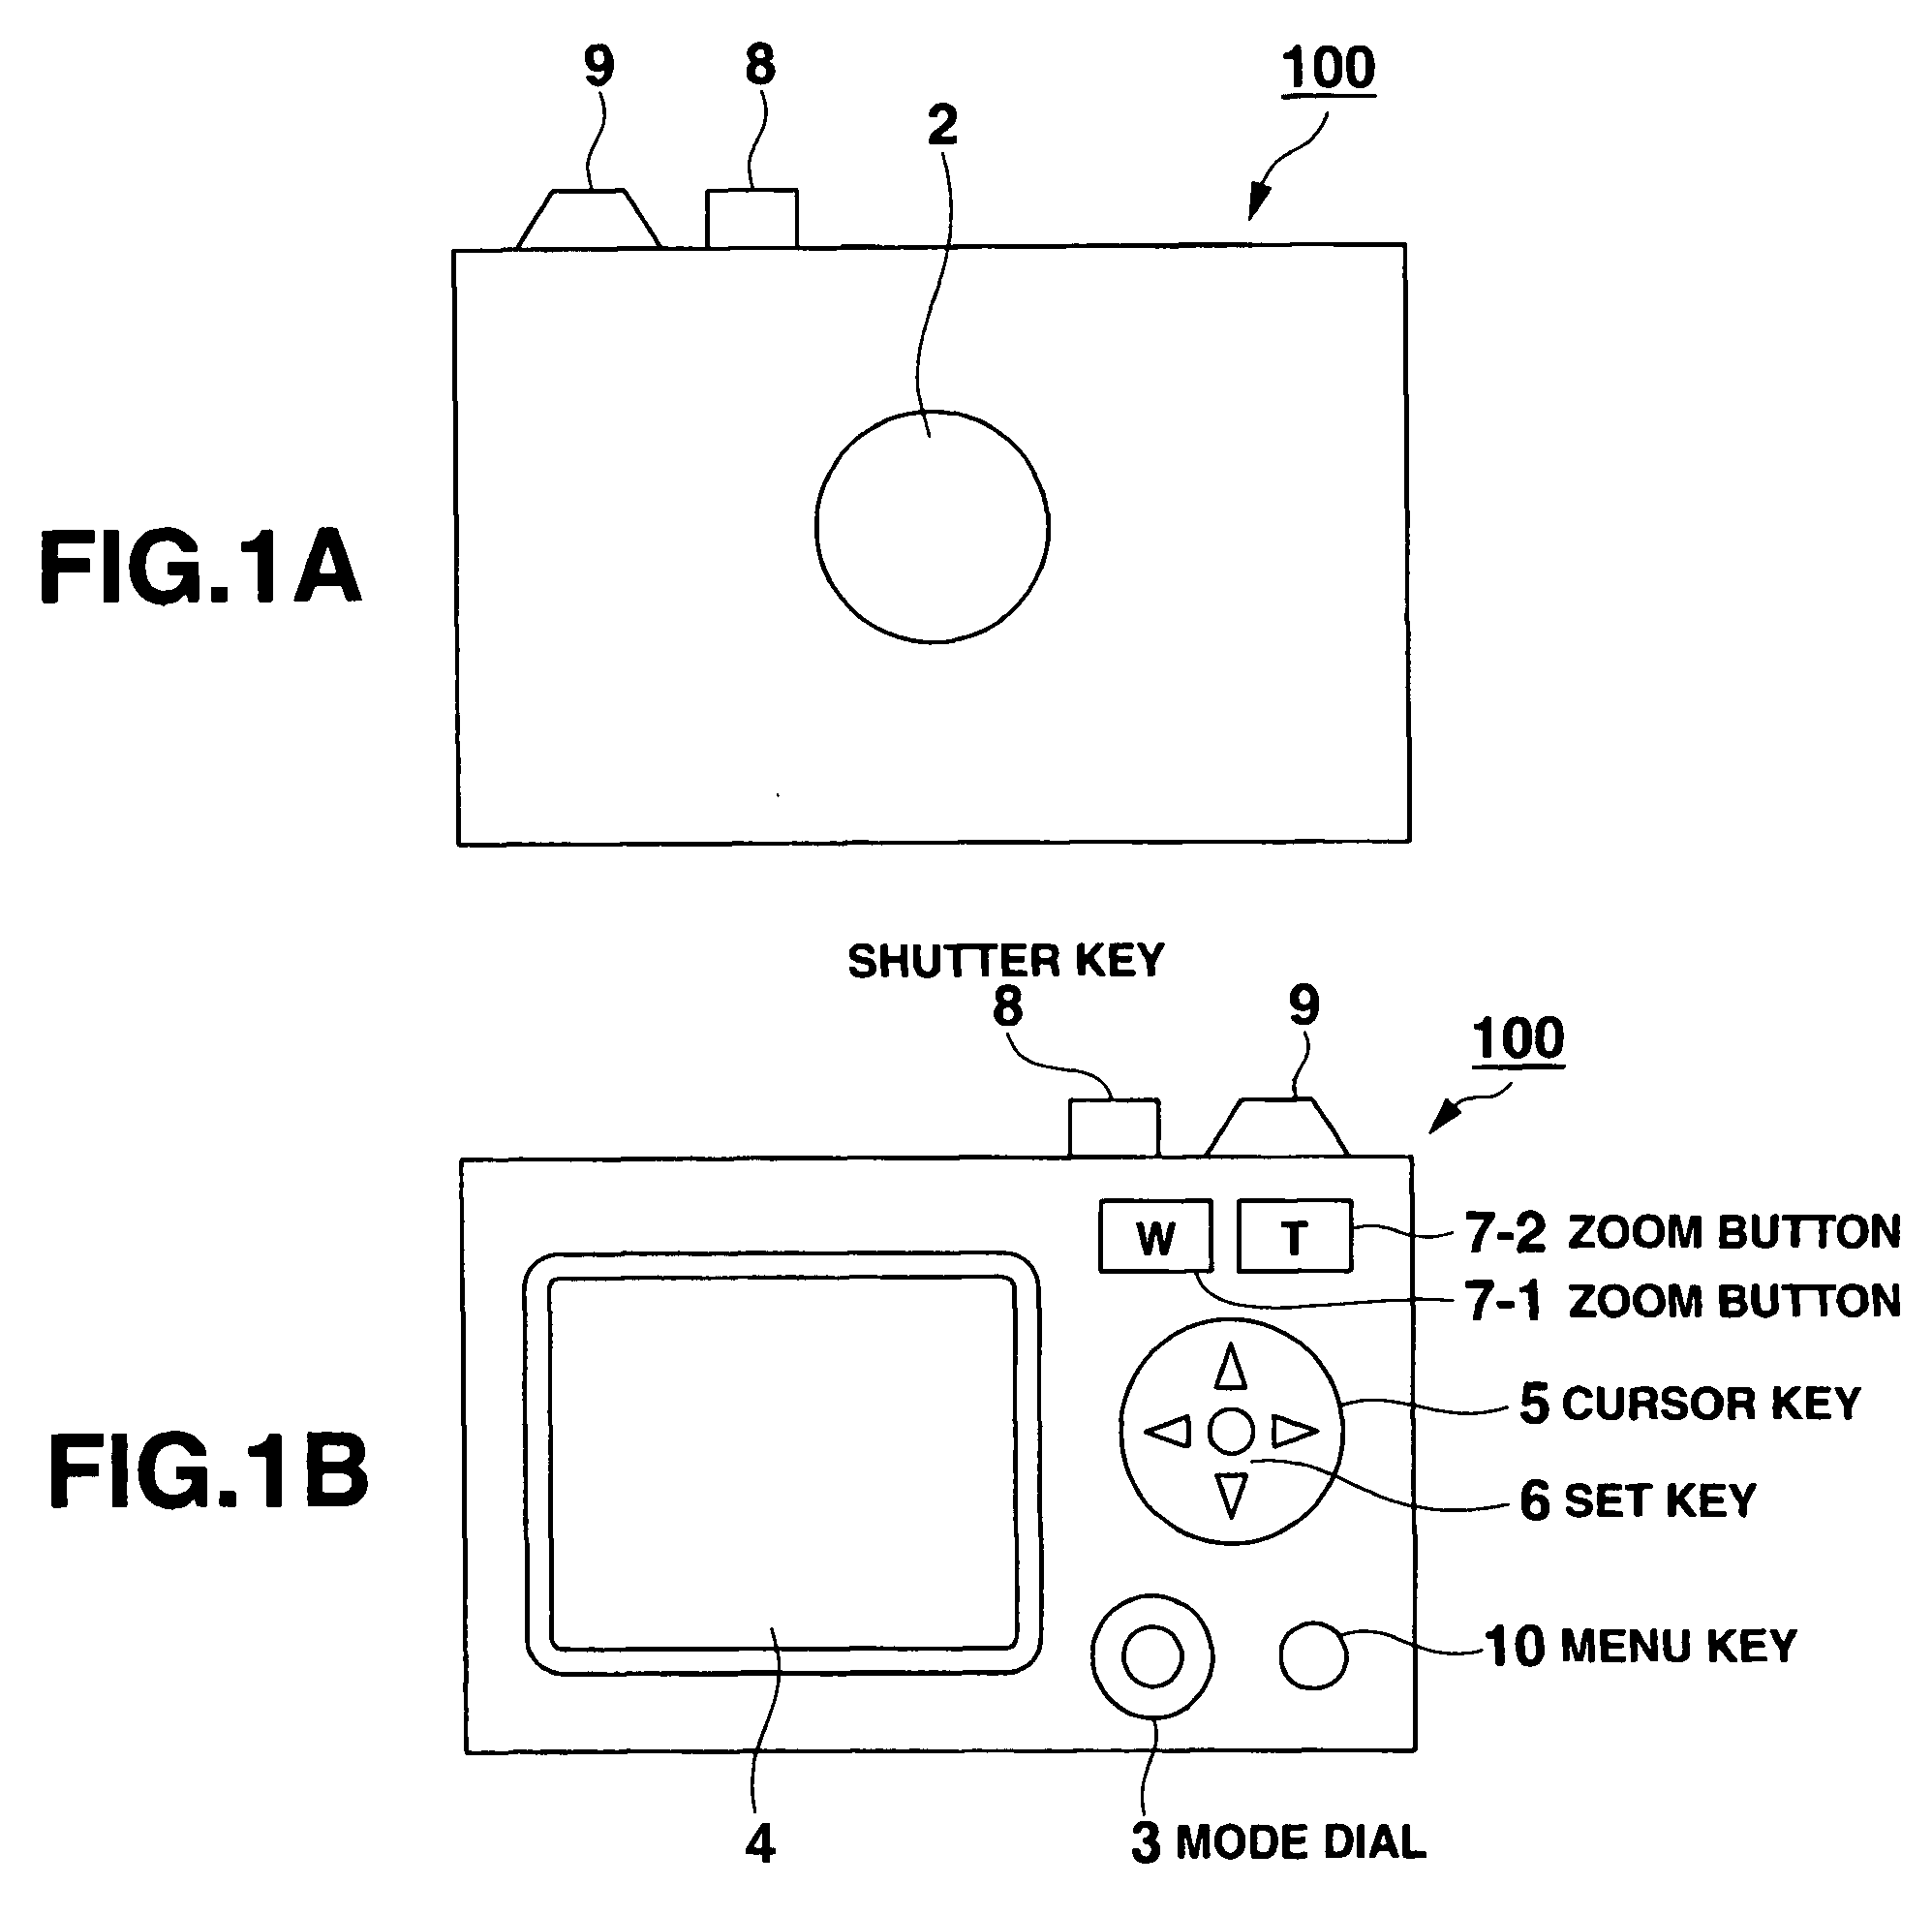 Imaging apparatus and method for displaying zoom information